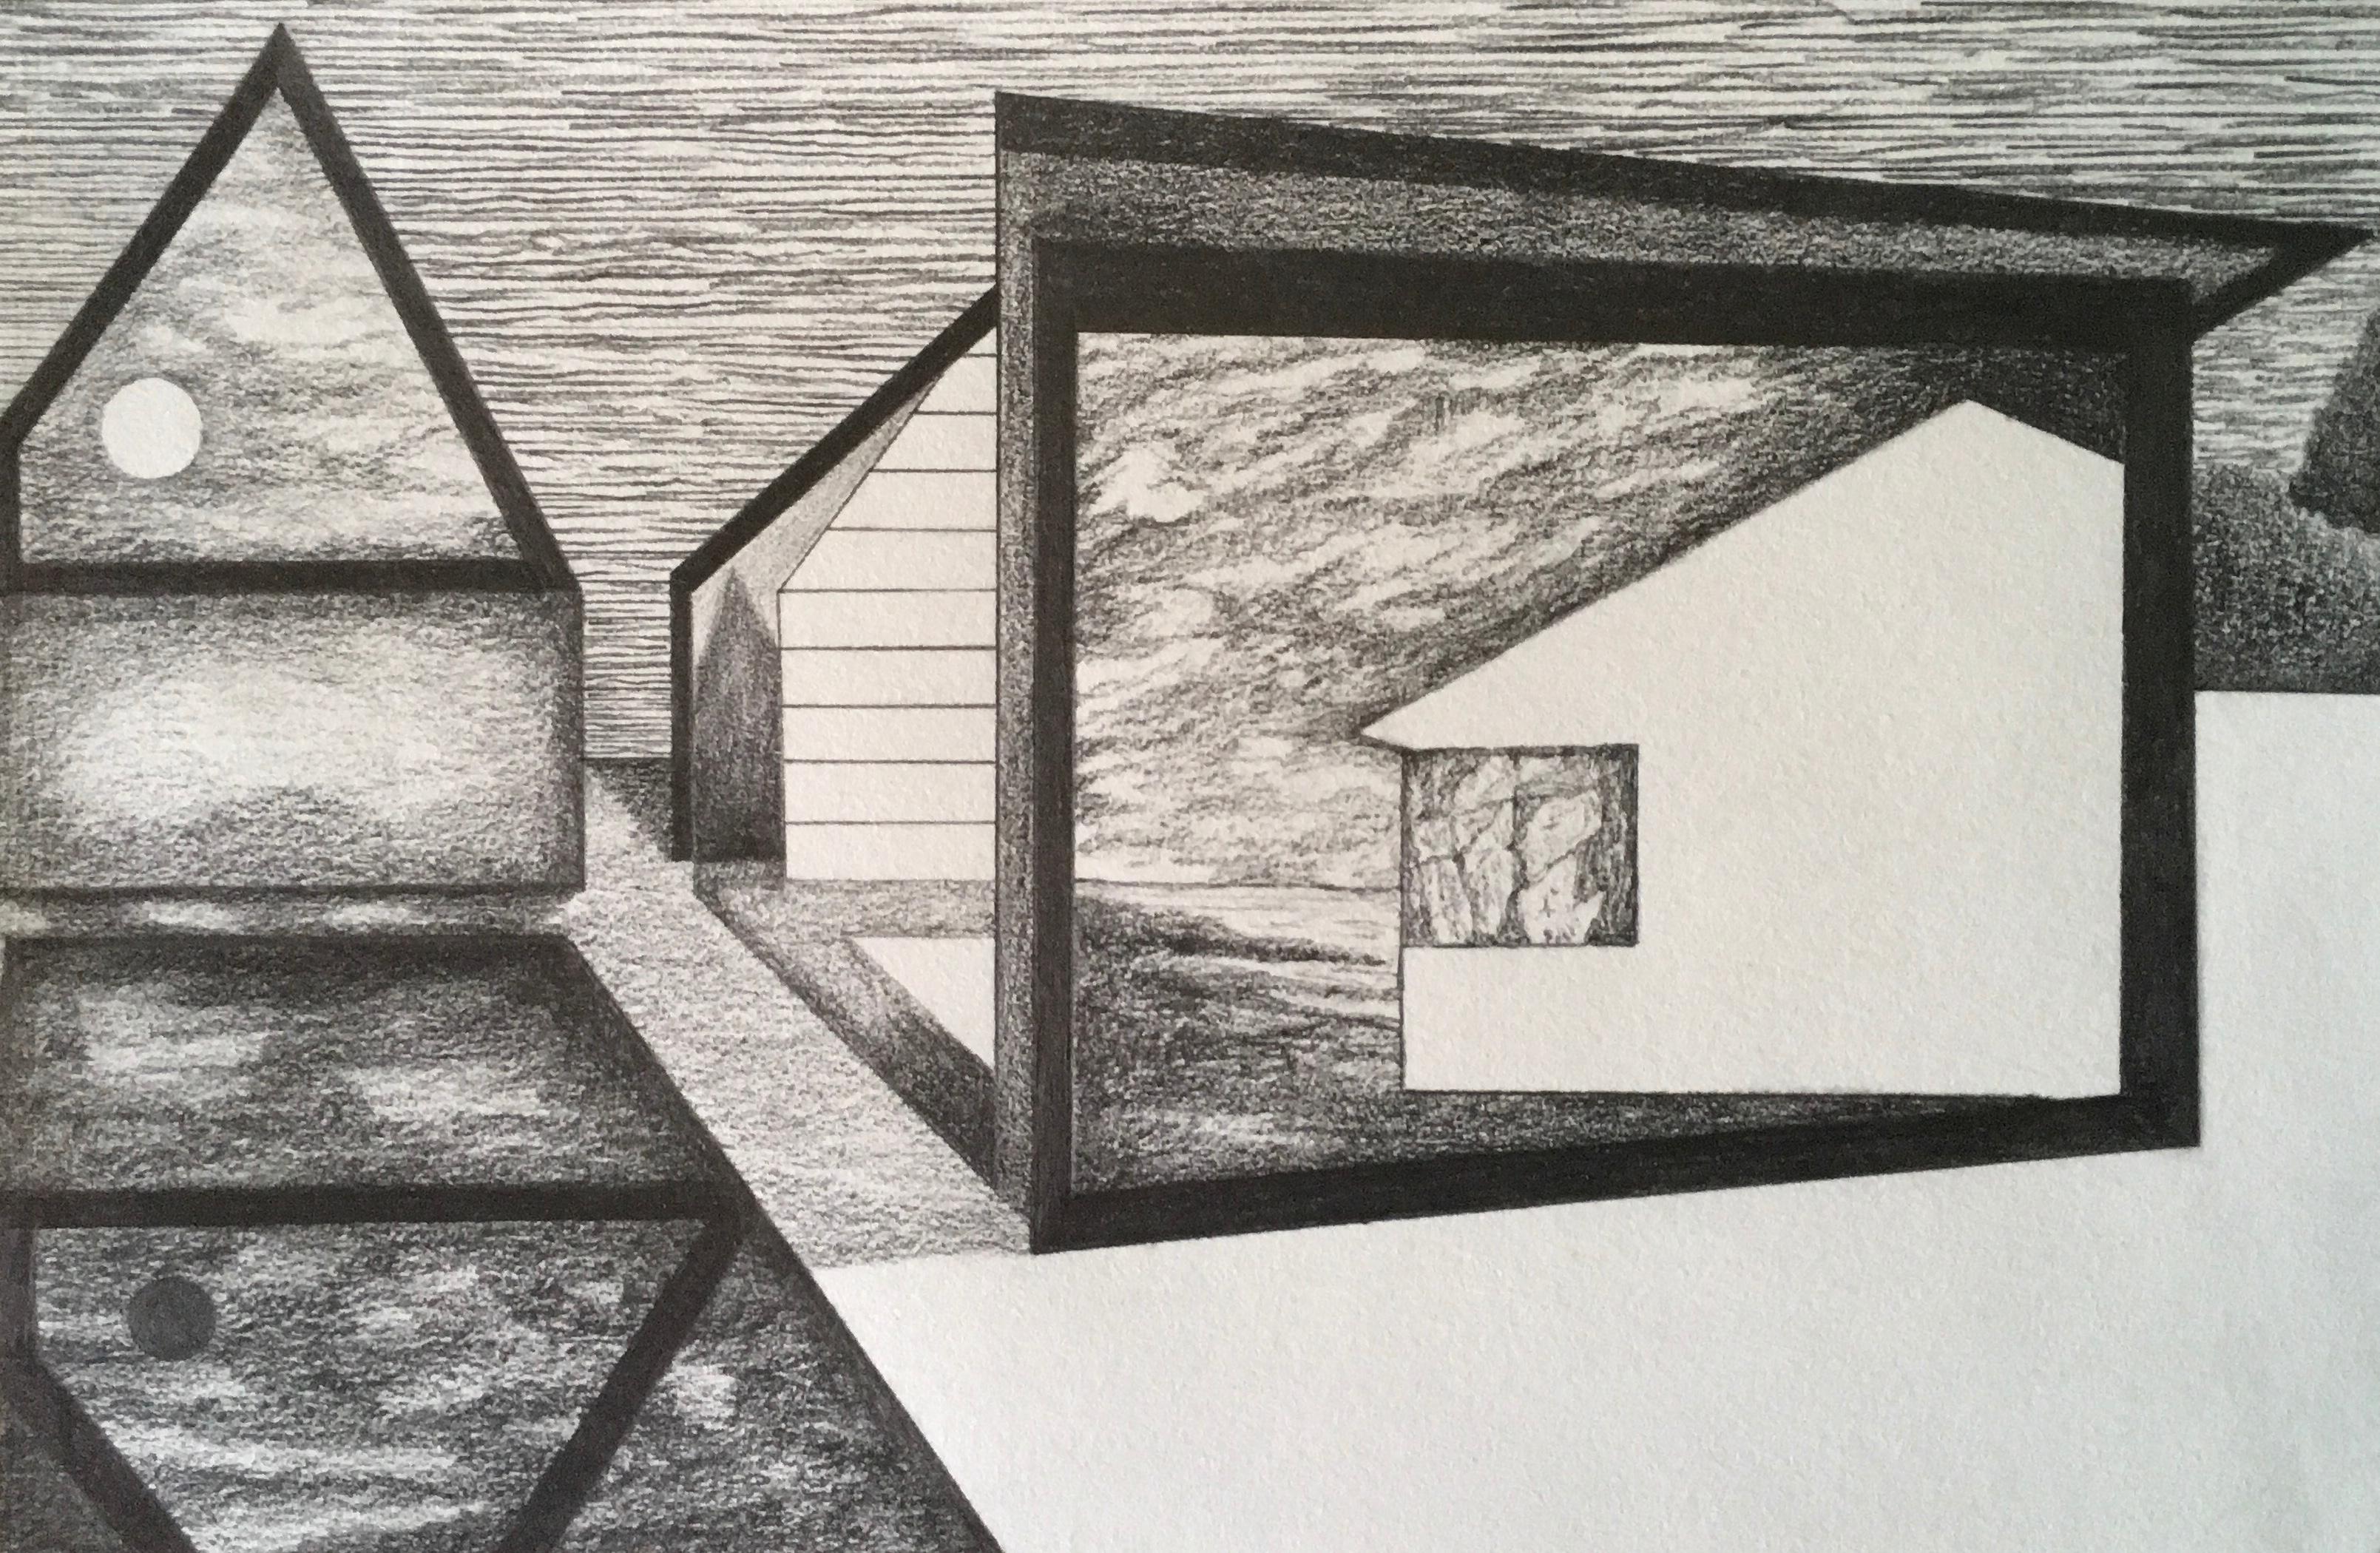 Whisper, graphite on paper, black and white architectural forms